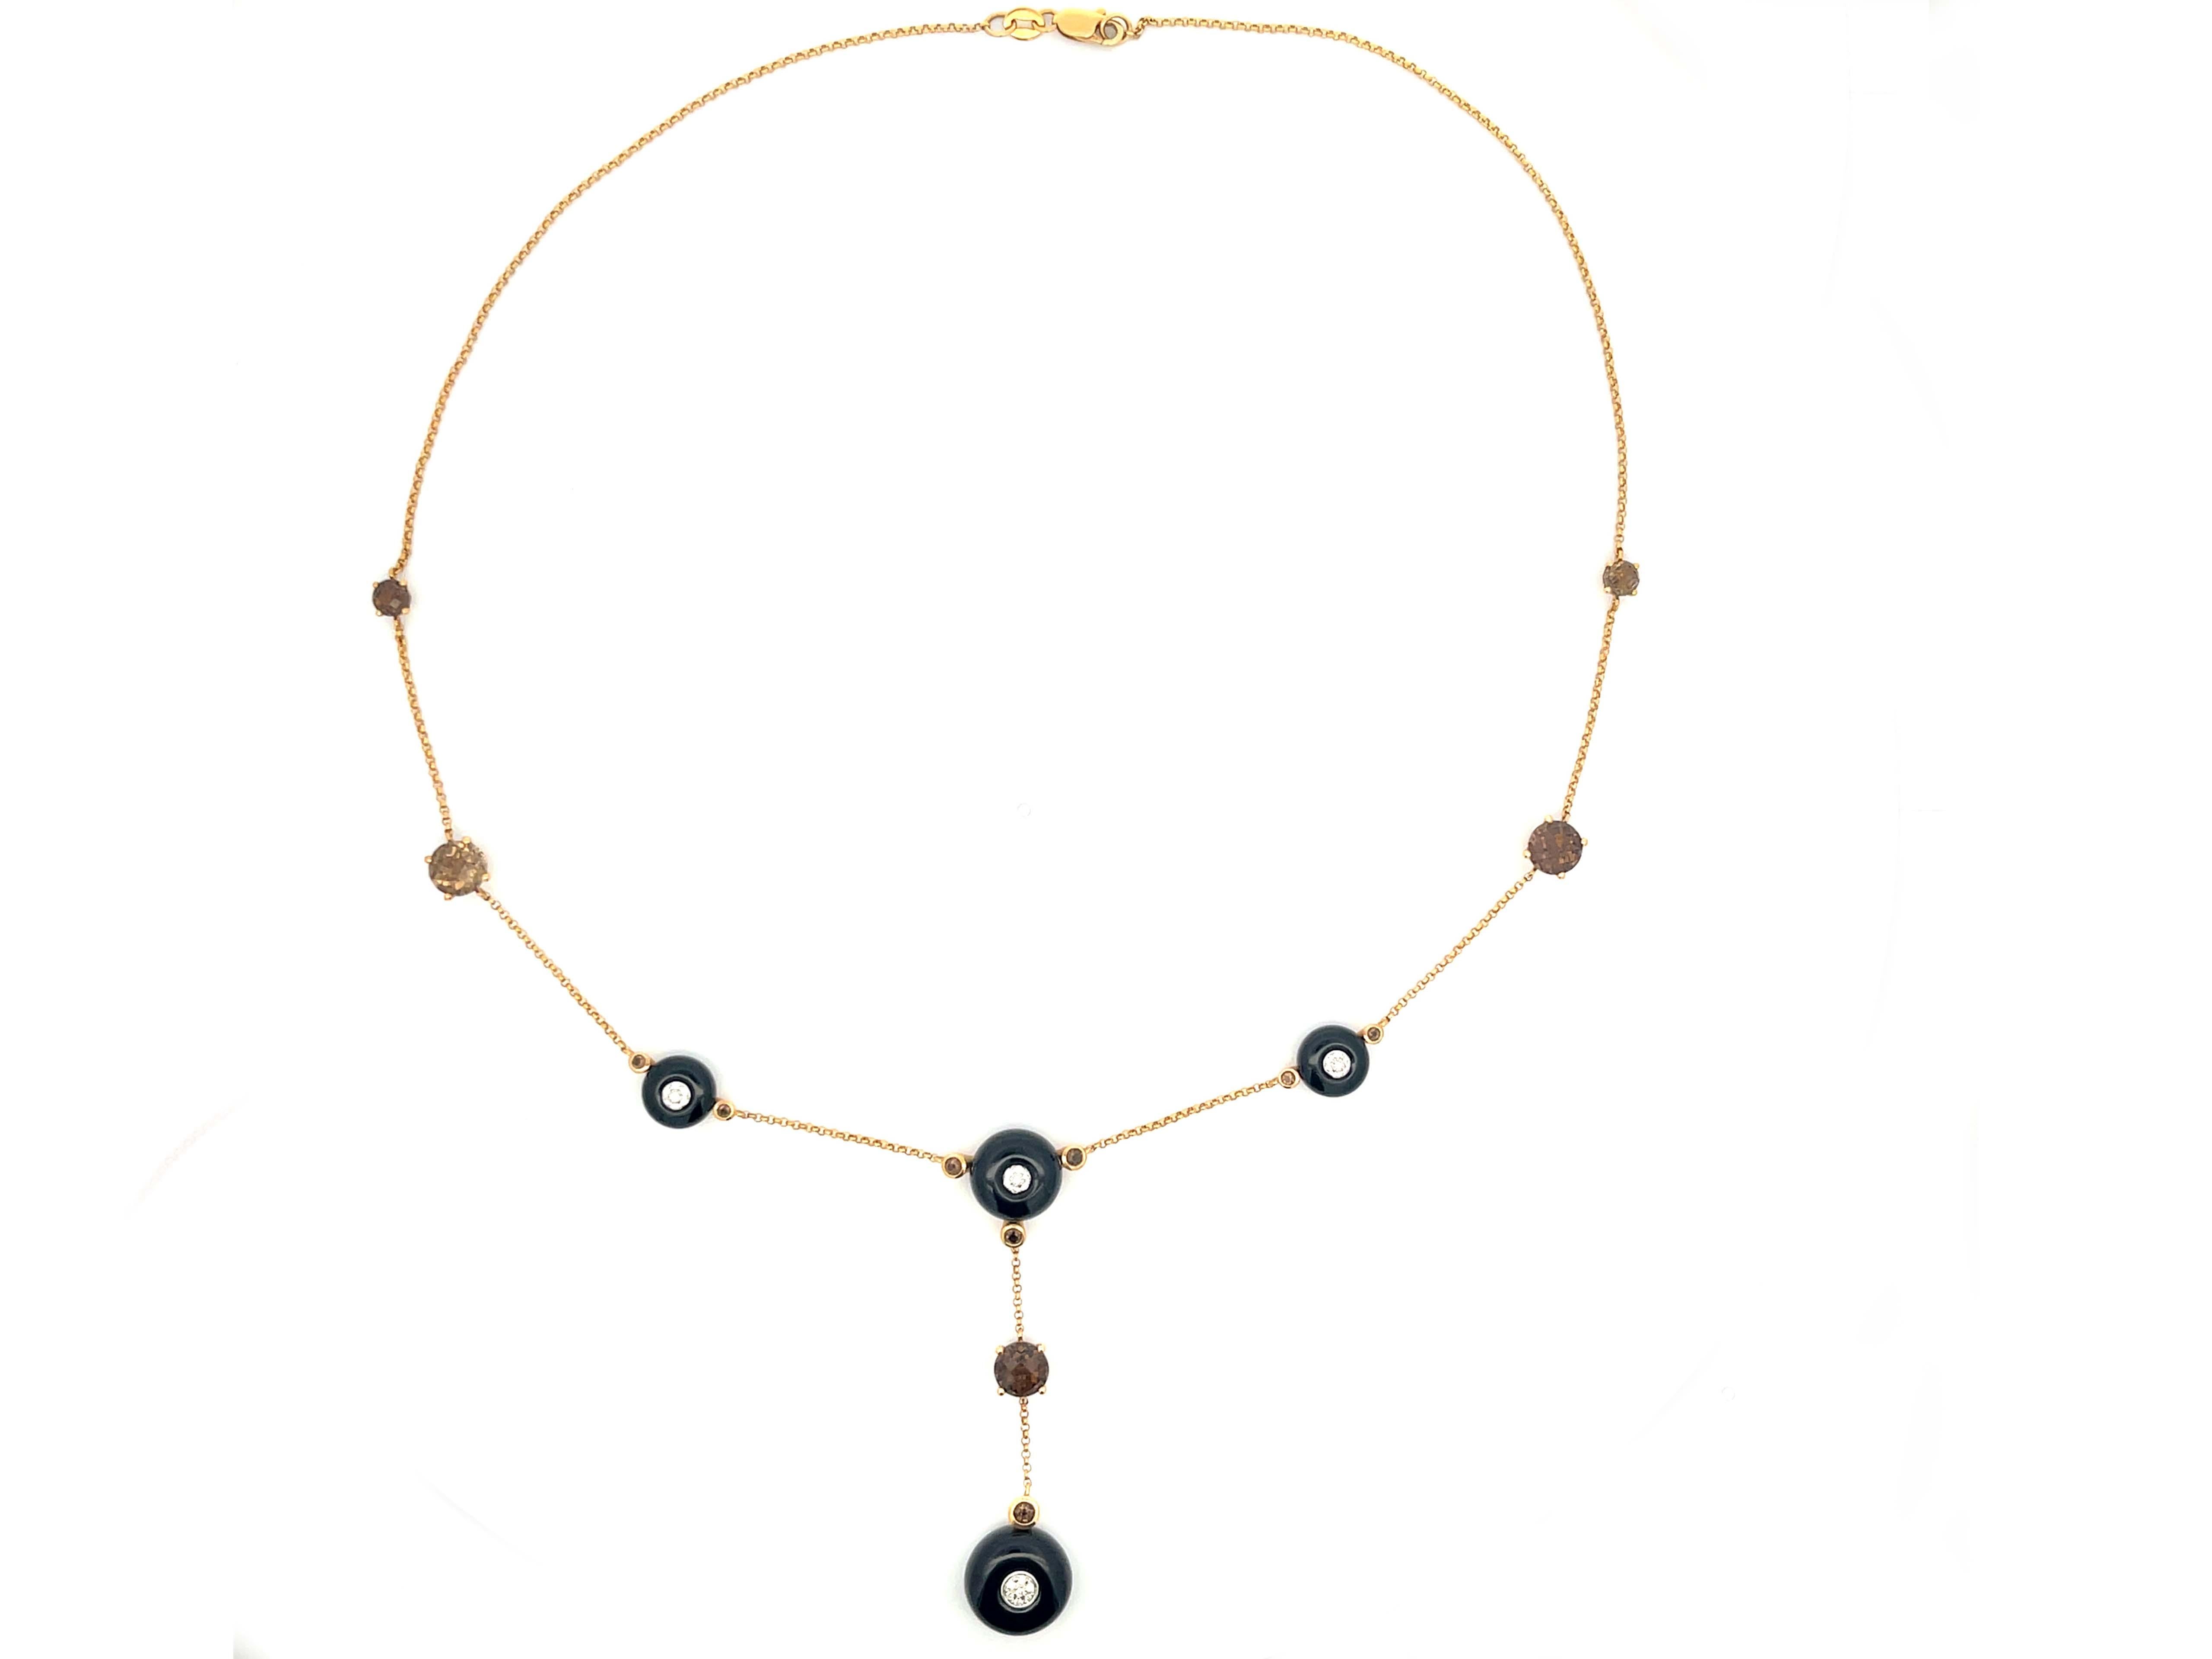 Brilliant Cut Black Onyx and Smokey Topaz Necklace in 14k Yellow Gold For Sale